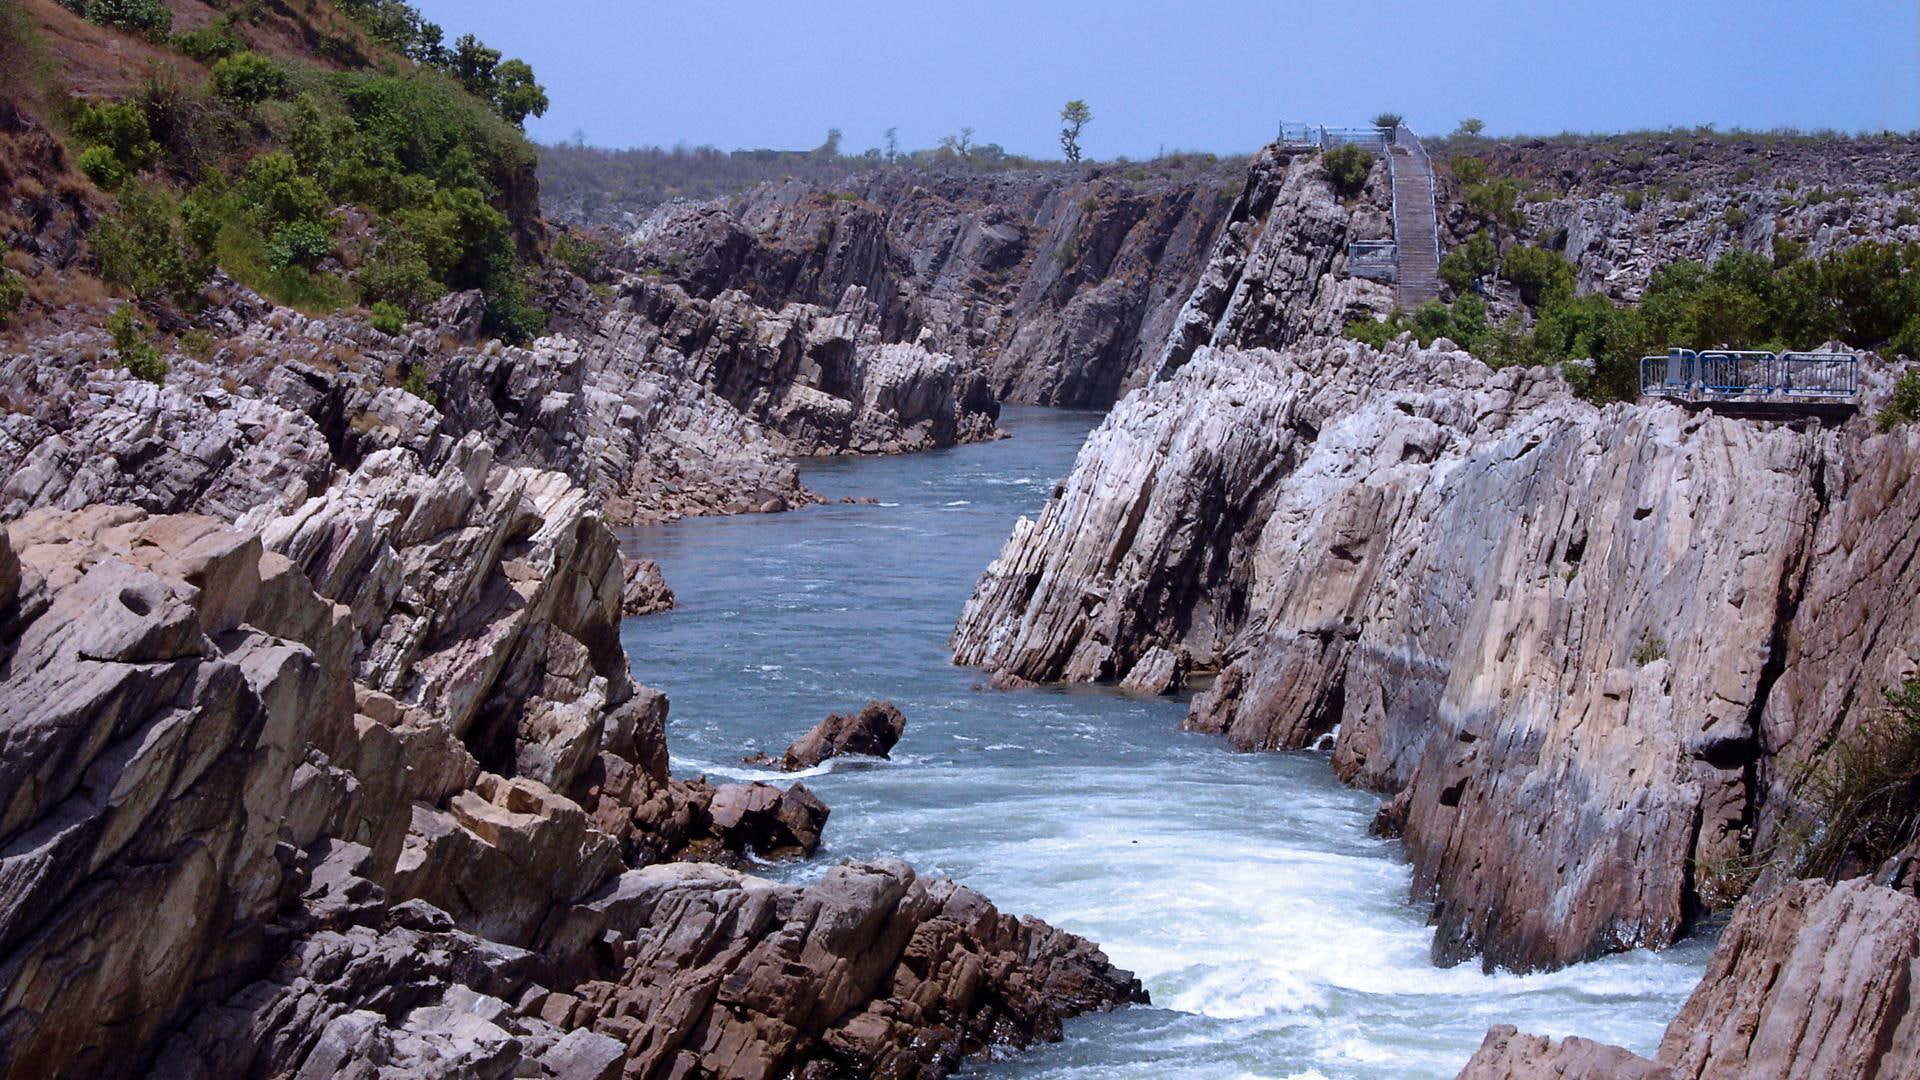 River Narmada In India, cliffs, gorge, flowing, nature and landscapes